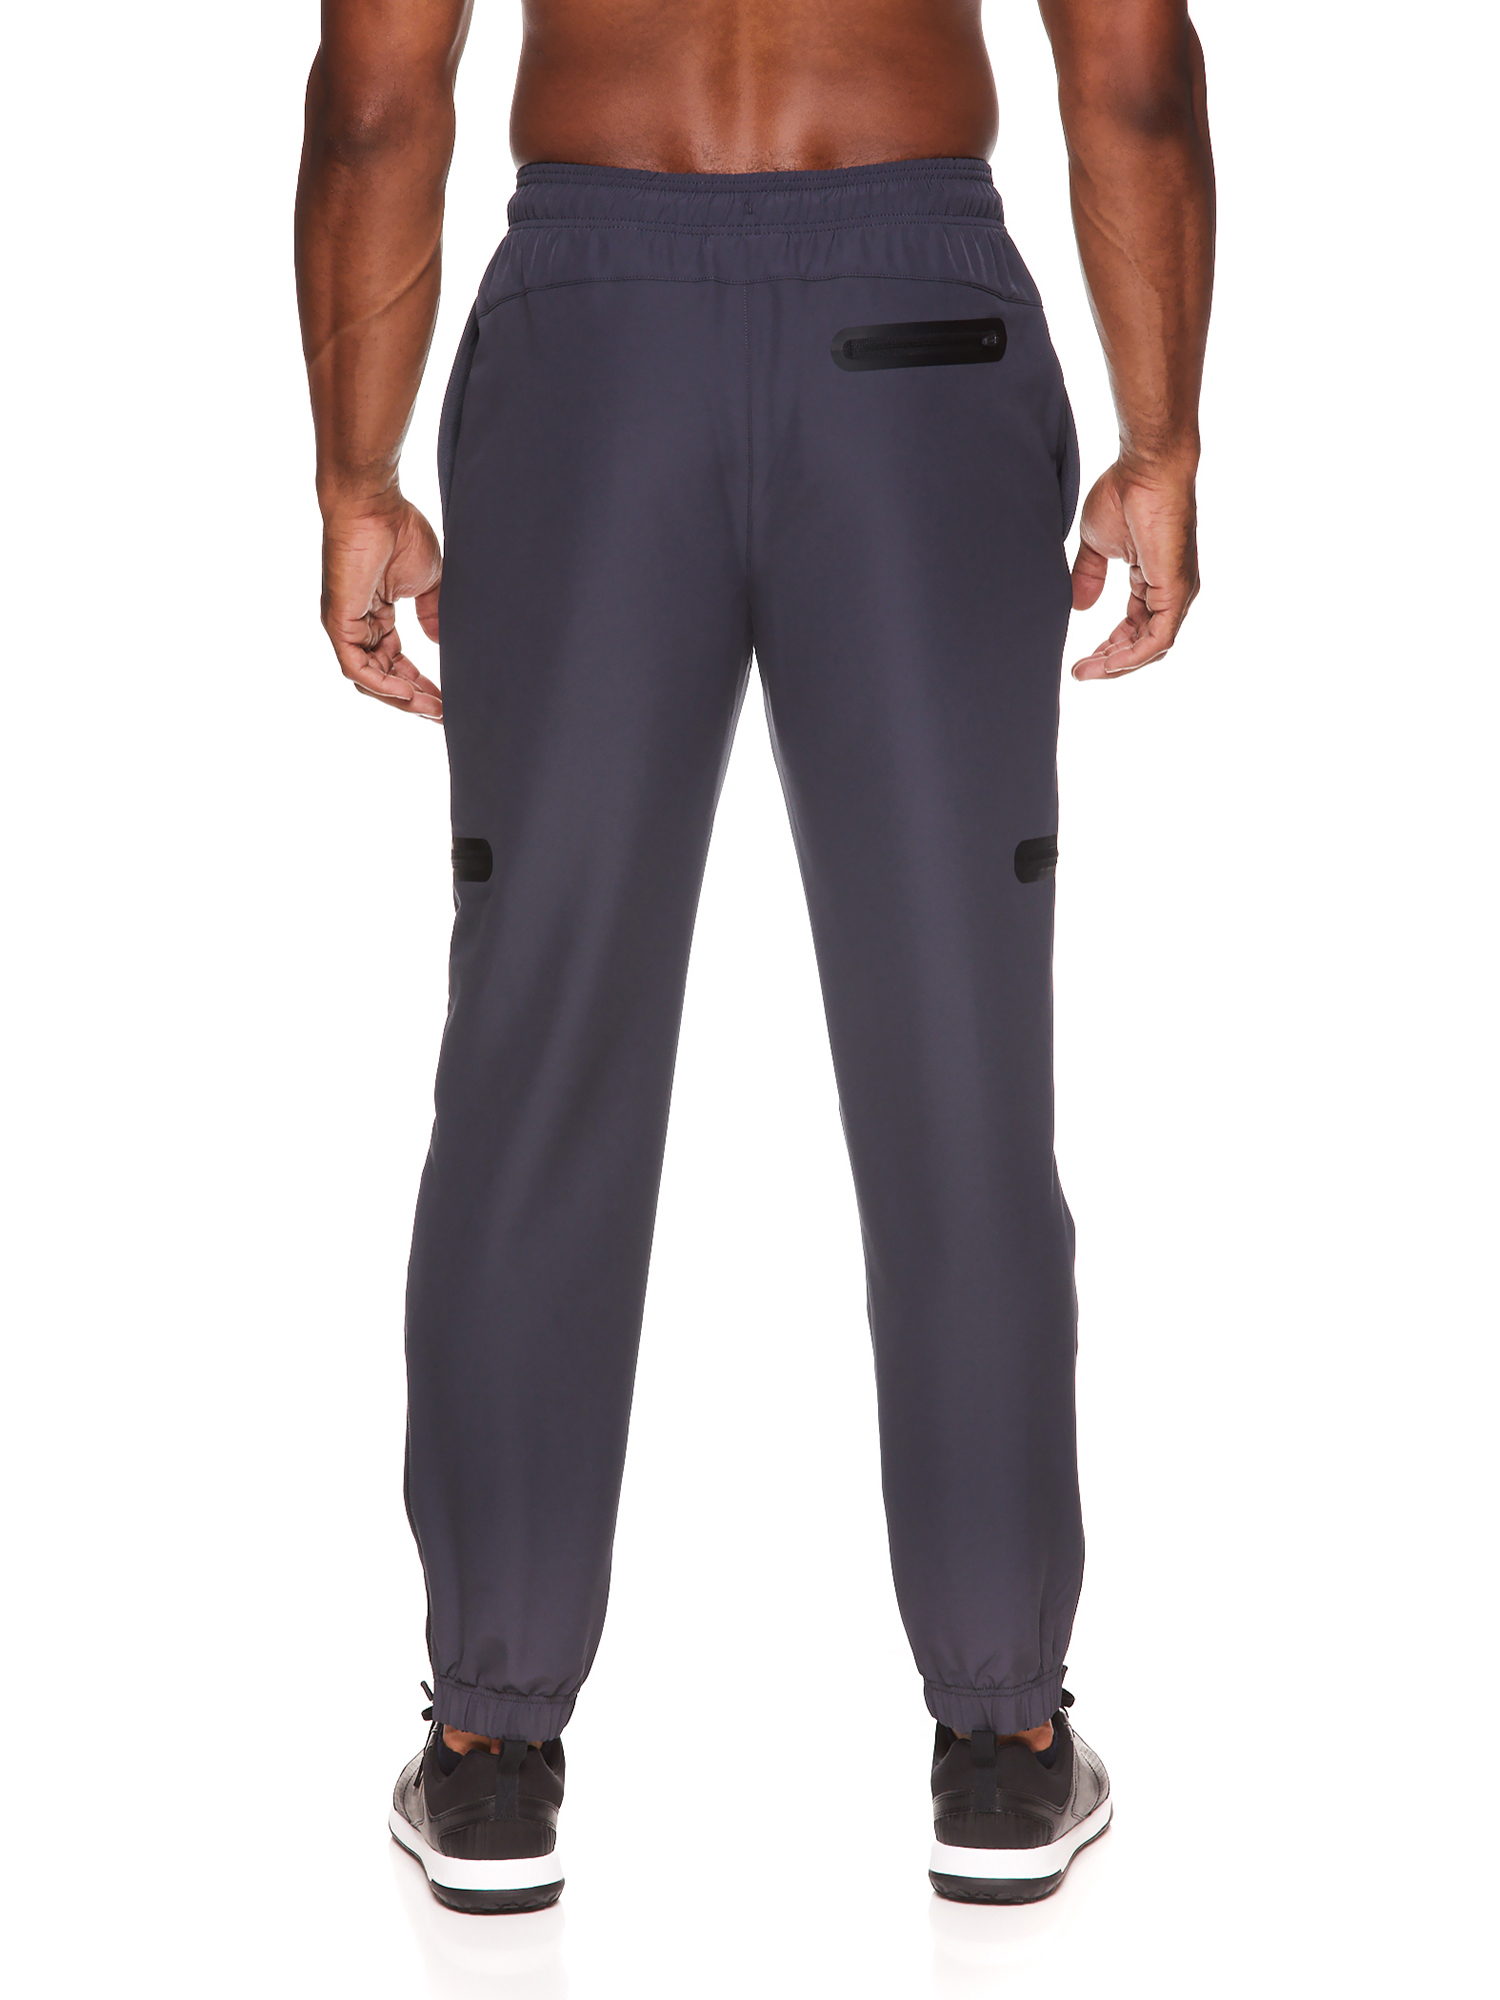 Reebok Men's and Big Men's Momentum Pant, up to Size 3XL - image 2 of 4